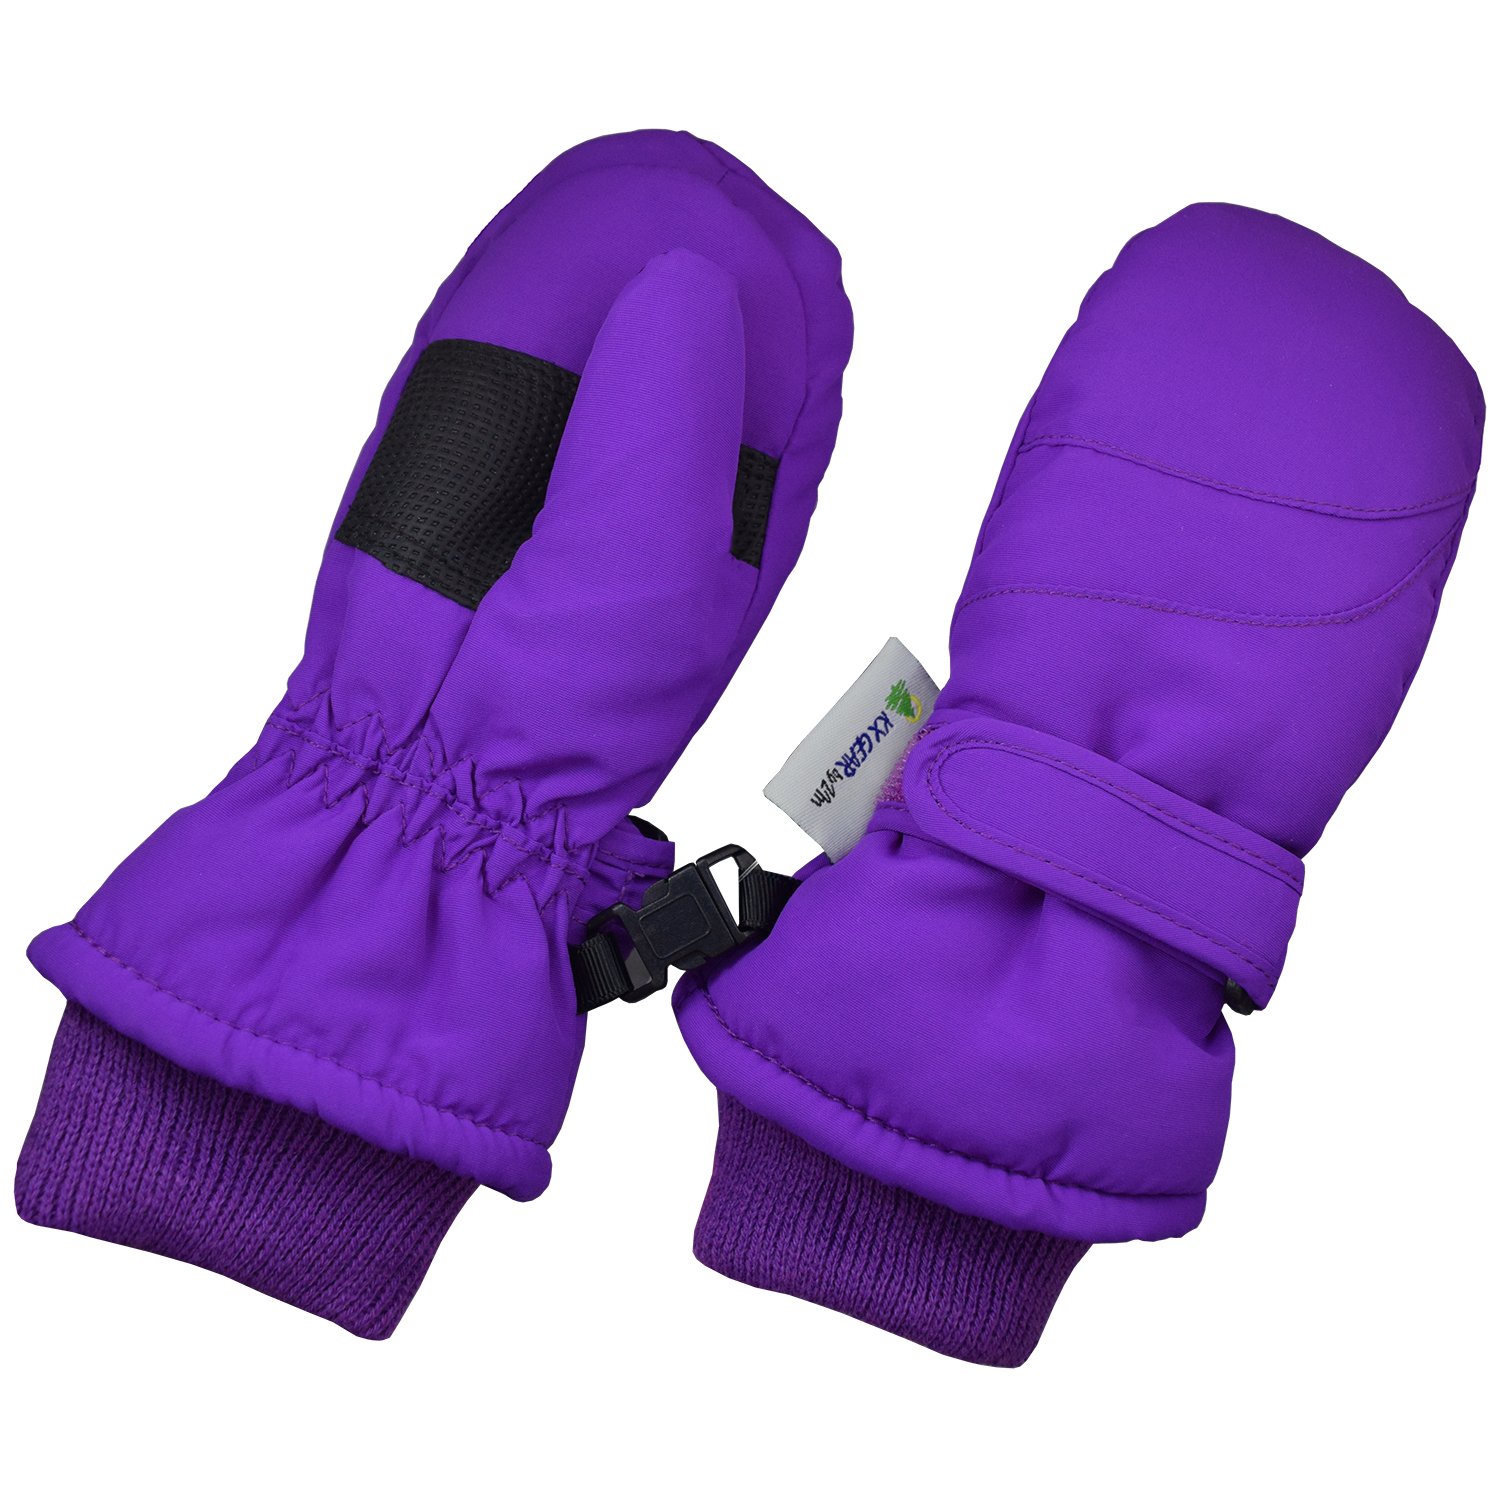 Children Toddlers and Baby Mittens Made With Thinsulate and Fleece - Winter Waterproof Gloves - KX GEAR by Zelda Matilda, Purple, 2-3 years